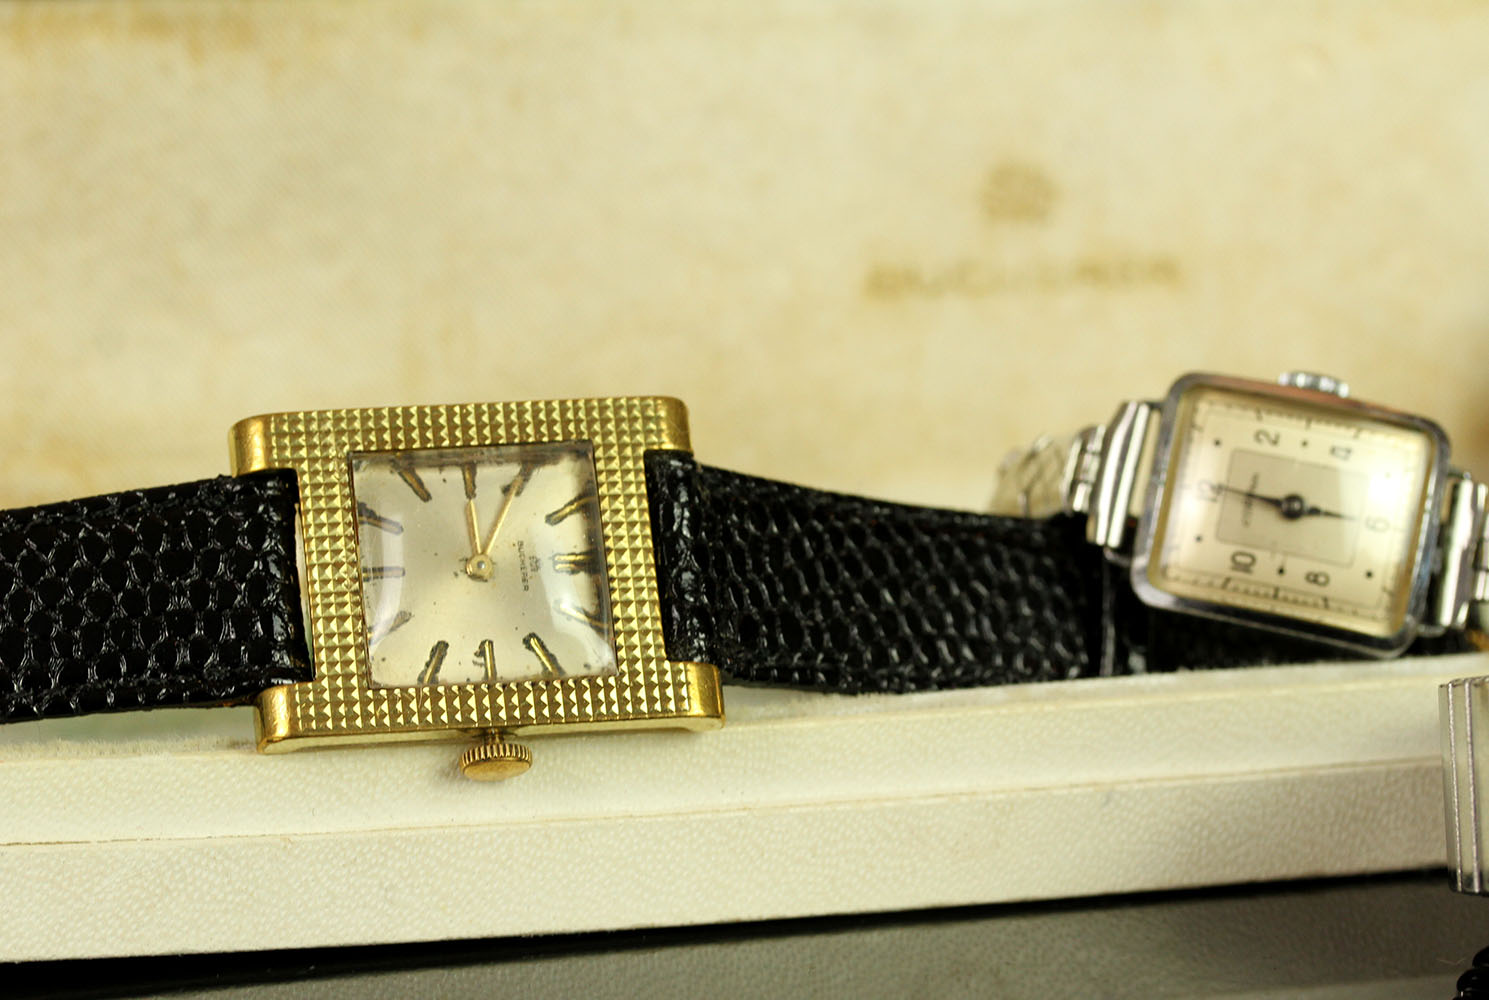 GROUP OF 5 VINTAGE WRISTWATCHES, 1 bucherer watch currently running with box, 1 peerex watch - Image 3 of 4